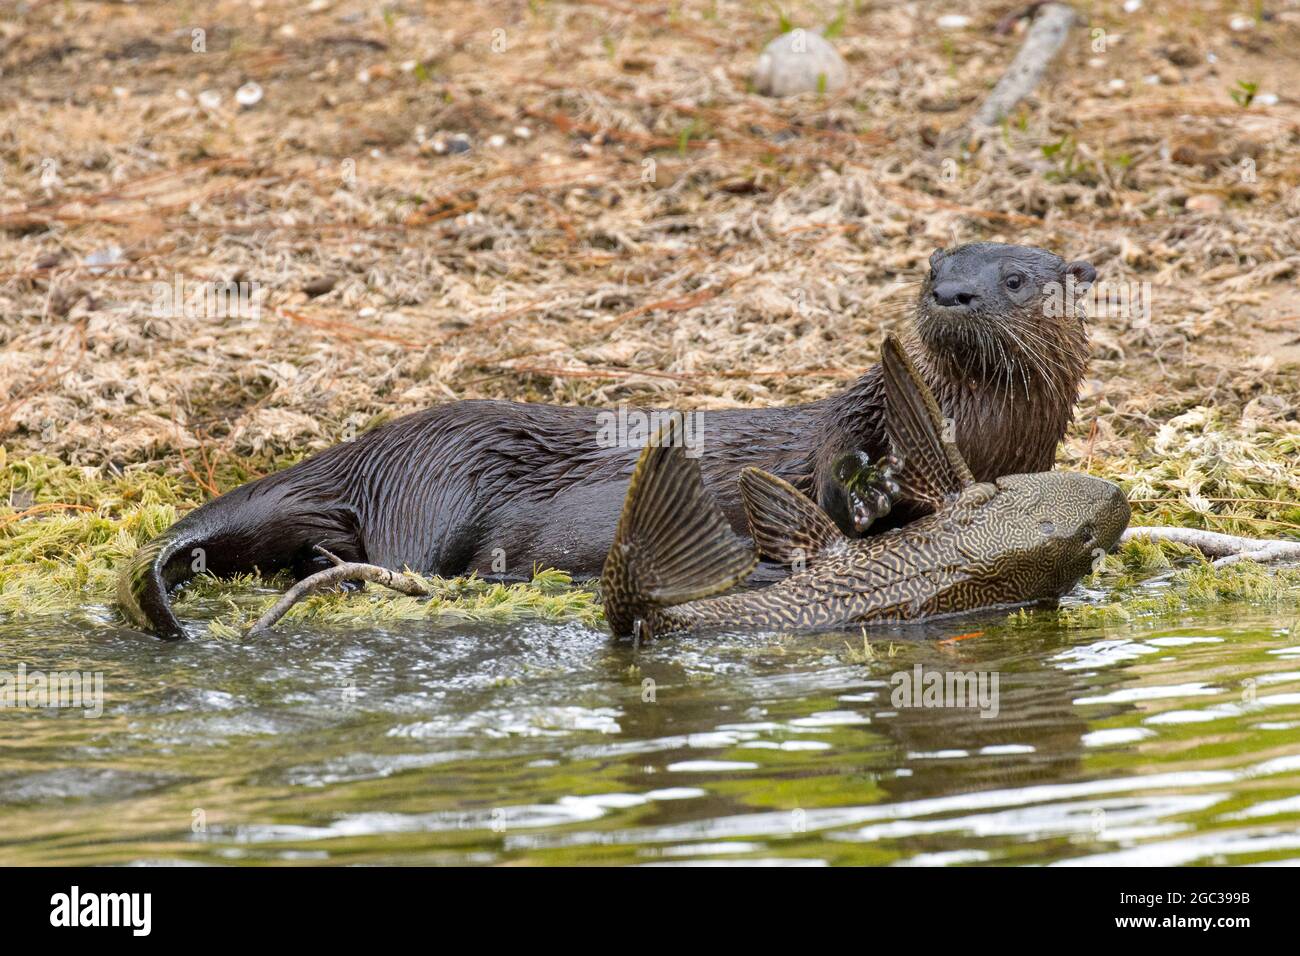 A North American river otter, Lontra canadensis, foraging and feeding on a sail fin pleco fish, or armored catfish. Stock Photo